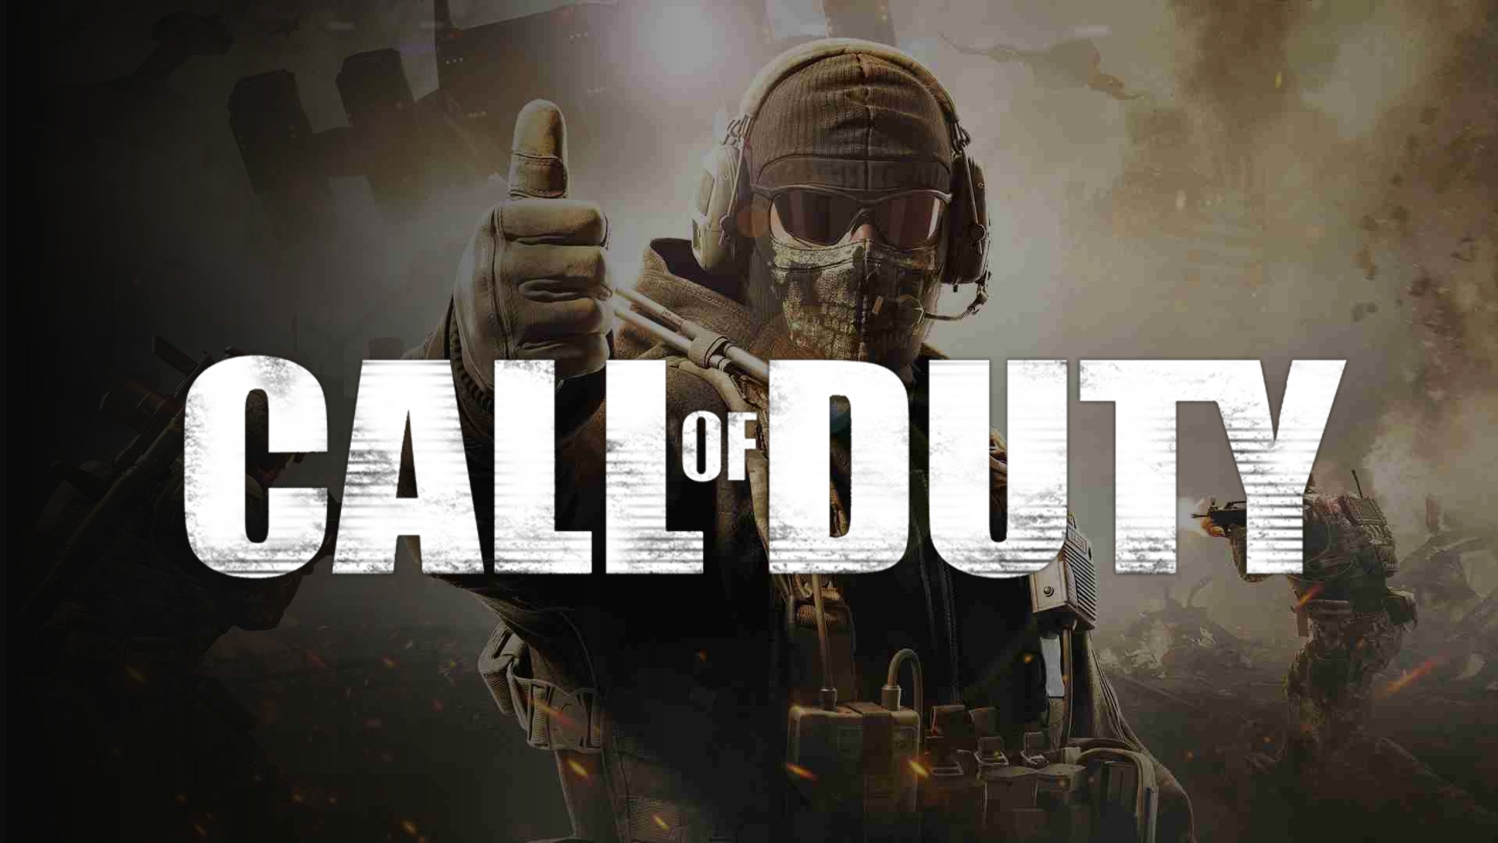 https://static.tweaktown.com/news/16x9/89191_call-of-duty-is-the-best-selling-franchise-in-playstation-history-sony-says.png